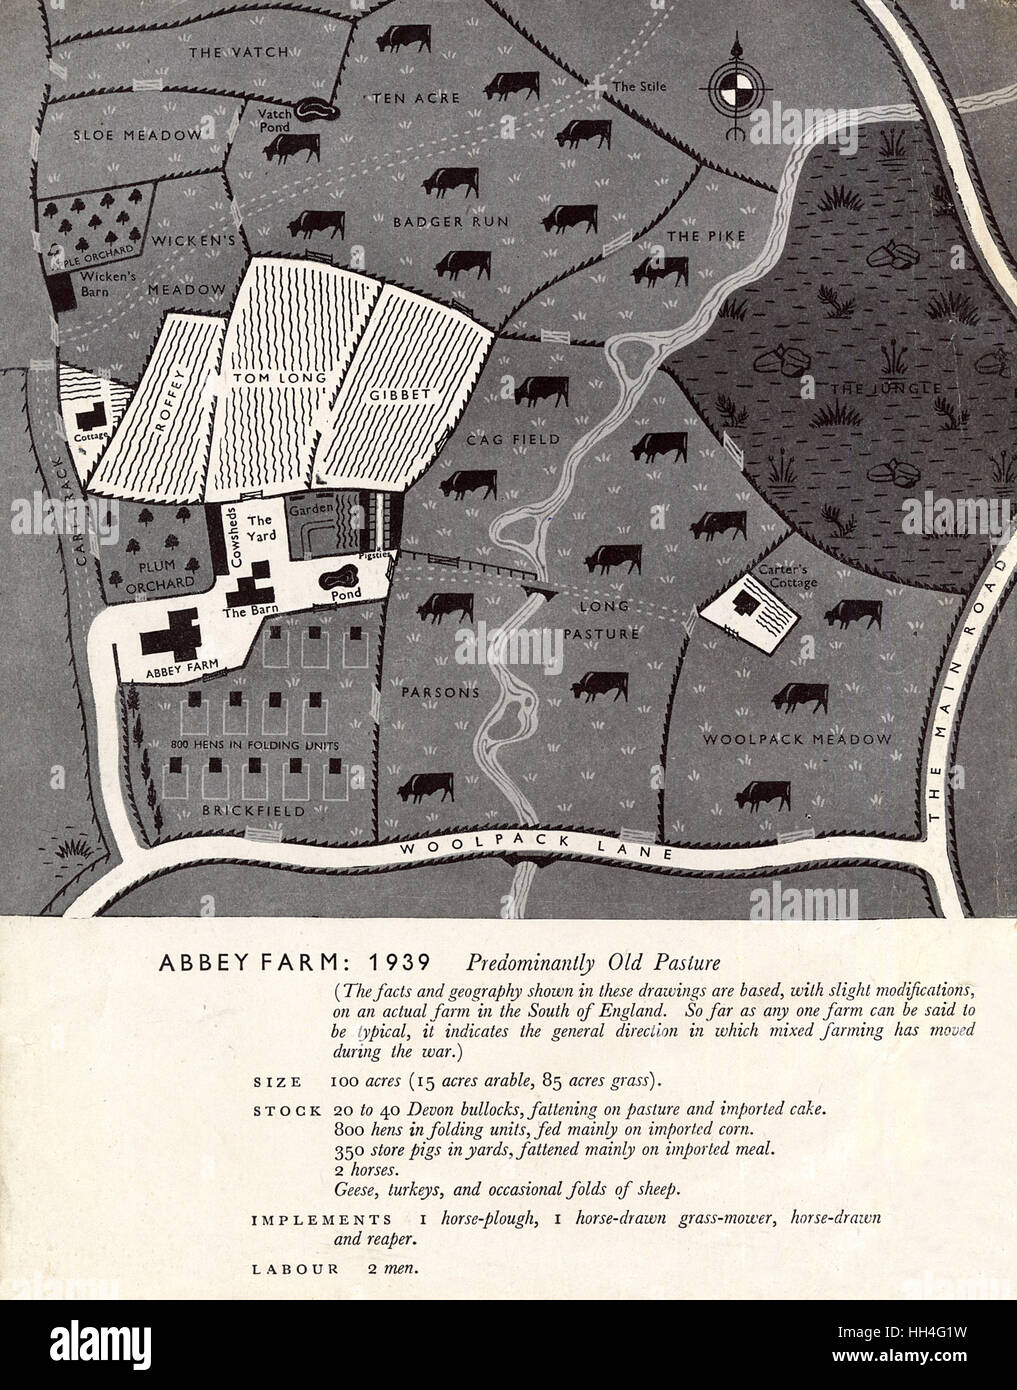 Farming pre-war in 1939 - layout of fields and crops (1/2) Stock Photo